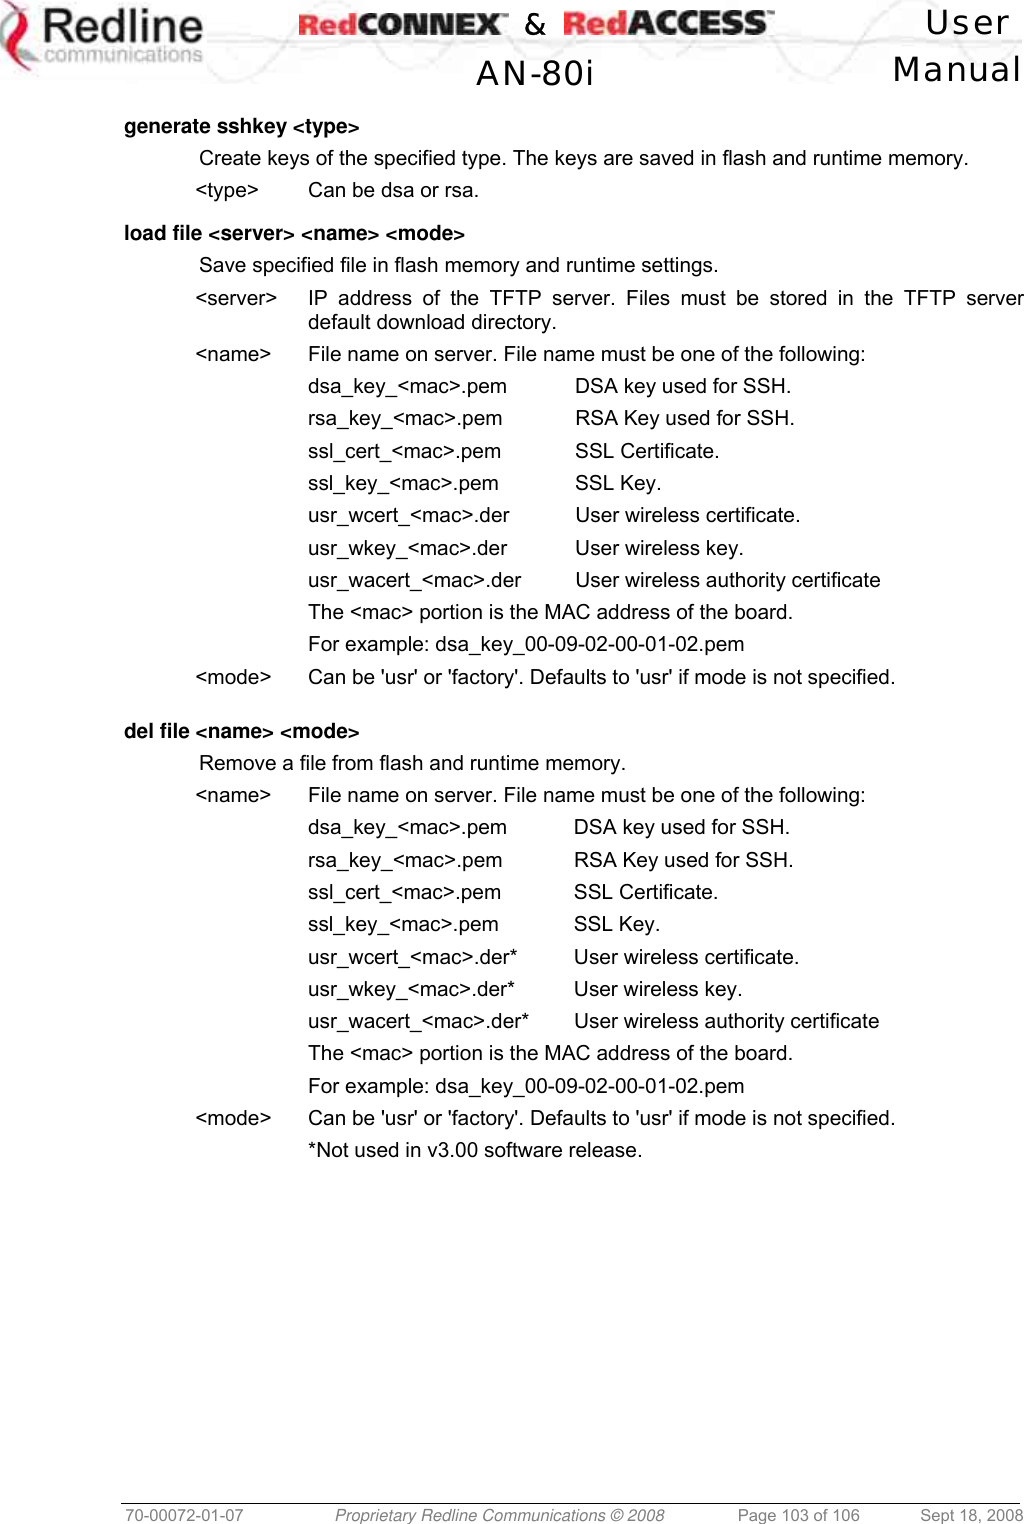    &amp;  User  AN-80i Manual  70-00072-01-07  Proprietary Redline Communications © 2008  Page 103 of 106  Sept 18, 2008  generate sshkey &lt;type&gt;   Create keys of the specified type. The keys are saved in flash and runtime memory. &lt;type&gt;  Can be dsa or rsa.  load file &lt;server&gt; &lt;name&gt; &lt;mode&gt;   Save specified file in flash memory and runtime settings. &lt;server&gt;  IP address of the TFTP server. Files must be stored in the TFTP server default download directory. &lt;name&gt;  File name on server. File name must be one of the following: dsa_key_&lt;mac&gt;.pem  DSA key used for SSH. rsa_key_&lt;mac&gt;.pem  RSA Key used for SSH. ssl_cert_&lt;mac&gt;.pem SSL Certificate. ssl_key_&lt;mac&gt;.pem SSL Key. usr_wcert_&lt;mac&gt;.der  User wireless certificate. usr_wkey_&lt;mac&gt;.der  User wireless key. usr_wacert_&lt;mac&gt;.der  User wireless authority certificate The &lt;mac&gt; portion is the MAC address of the board. For example: dsa_key_00-09-02-00-01-02.pem &lt;mode&gt;  Can be &apos;usr&apos; or &apos;factory&apos;. Defaults to &apos;usr&apos; if mode is not specified.   del file &lt;name&gt; &lt;mode&gt;    Remove a file from flash and runtime memory. &lt;name&gt;  File name on server. File name must be one of the following: dsa_key_&lt;mac&gt;.pem  DSA key used for SSH. rsa_key_&lt;mac&gt;.pem  RSA Key used for SSH. ssl_cert_&lt;mac&gt;.pem SSL Certificate. ssl_key_&lt;mac&gt;.pem SSL Key. usr_wcert_&lt;mac&gt;.der*  User wireless certificate. usr_wkey_&lt;mac&gt;.der*  User wireless key. usr_wacert_&lt;mac&gt;.der*  User wireless authority certificate The &lt;mac&gt; portion is the MAC address of the board. For example: dsa_key_00-09-02-00-01-02.pem &lt;mode&gt;  Can be &apos;usr&apos; or &apos;factory&apos;. Defaults to &apos;usr&apos; if mode is not specified.   *Not used in v3.00 software release.  